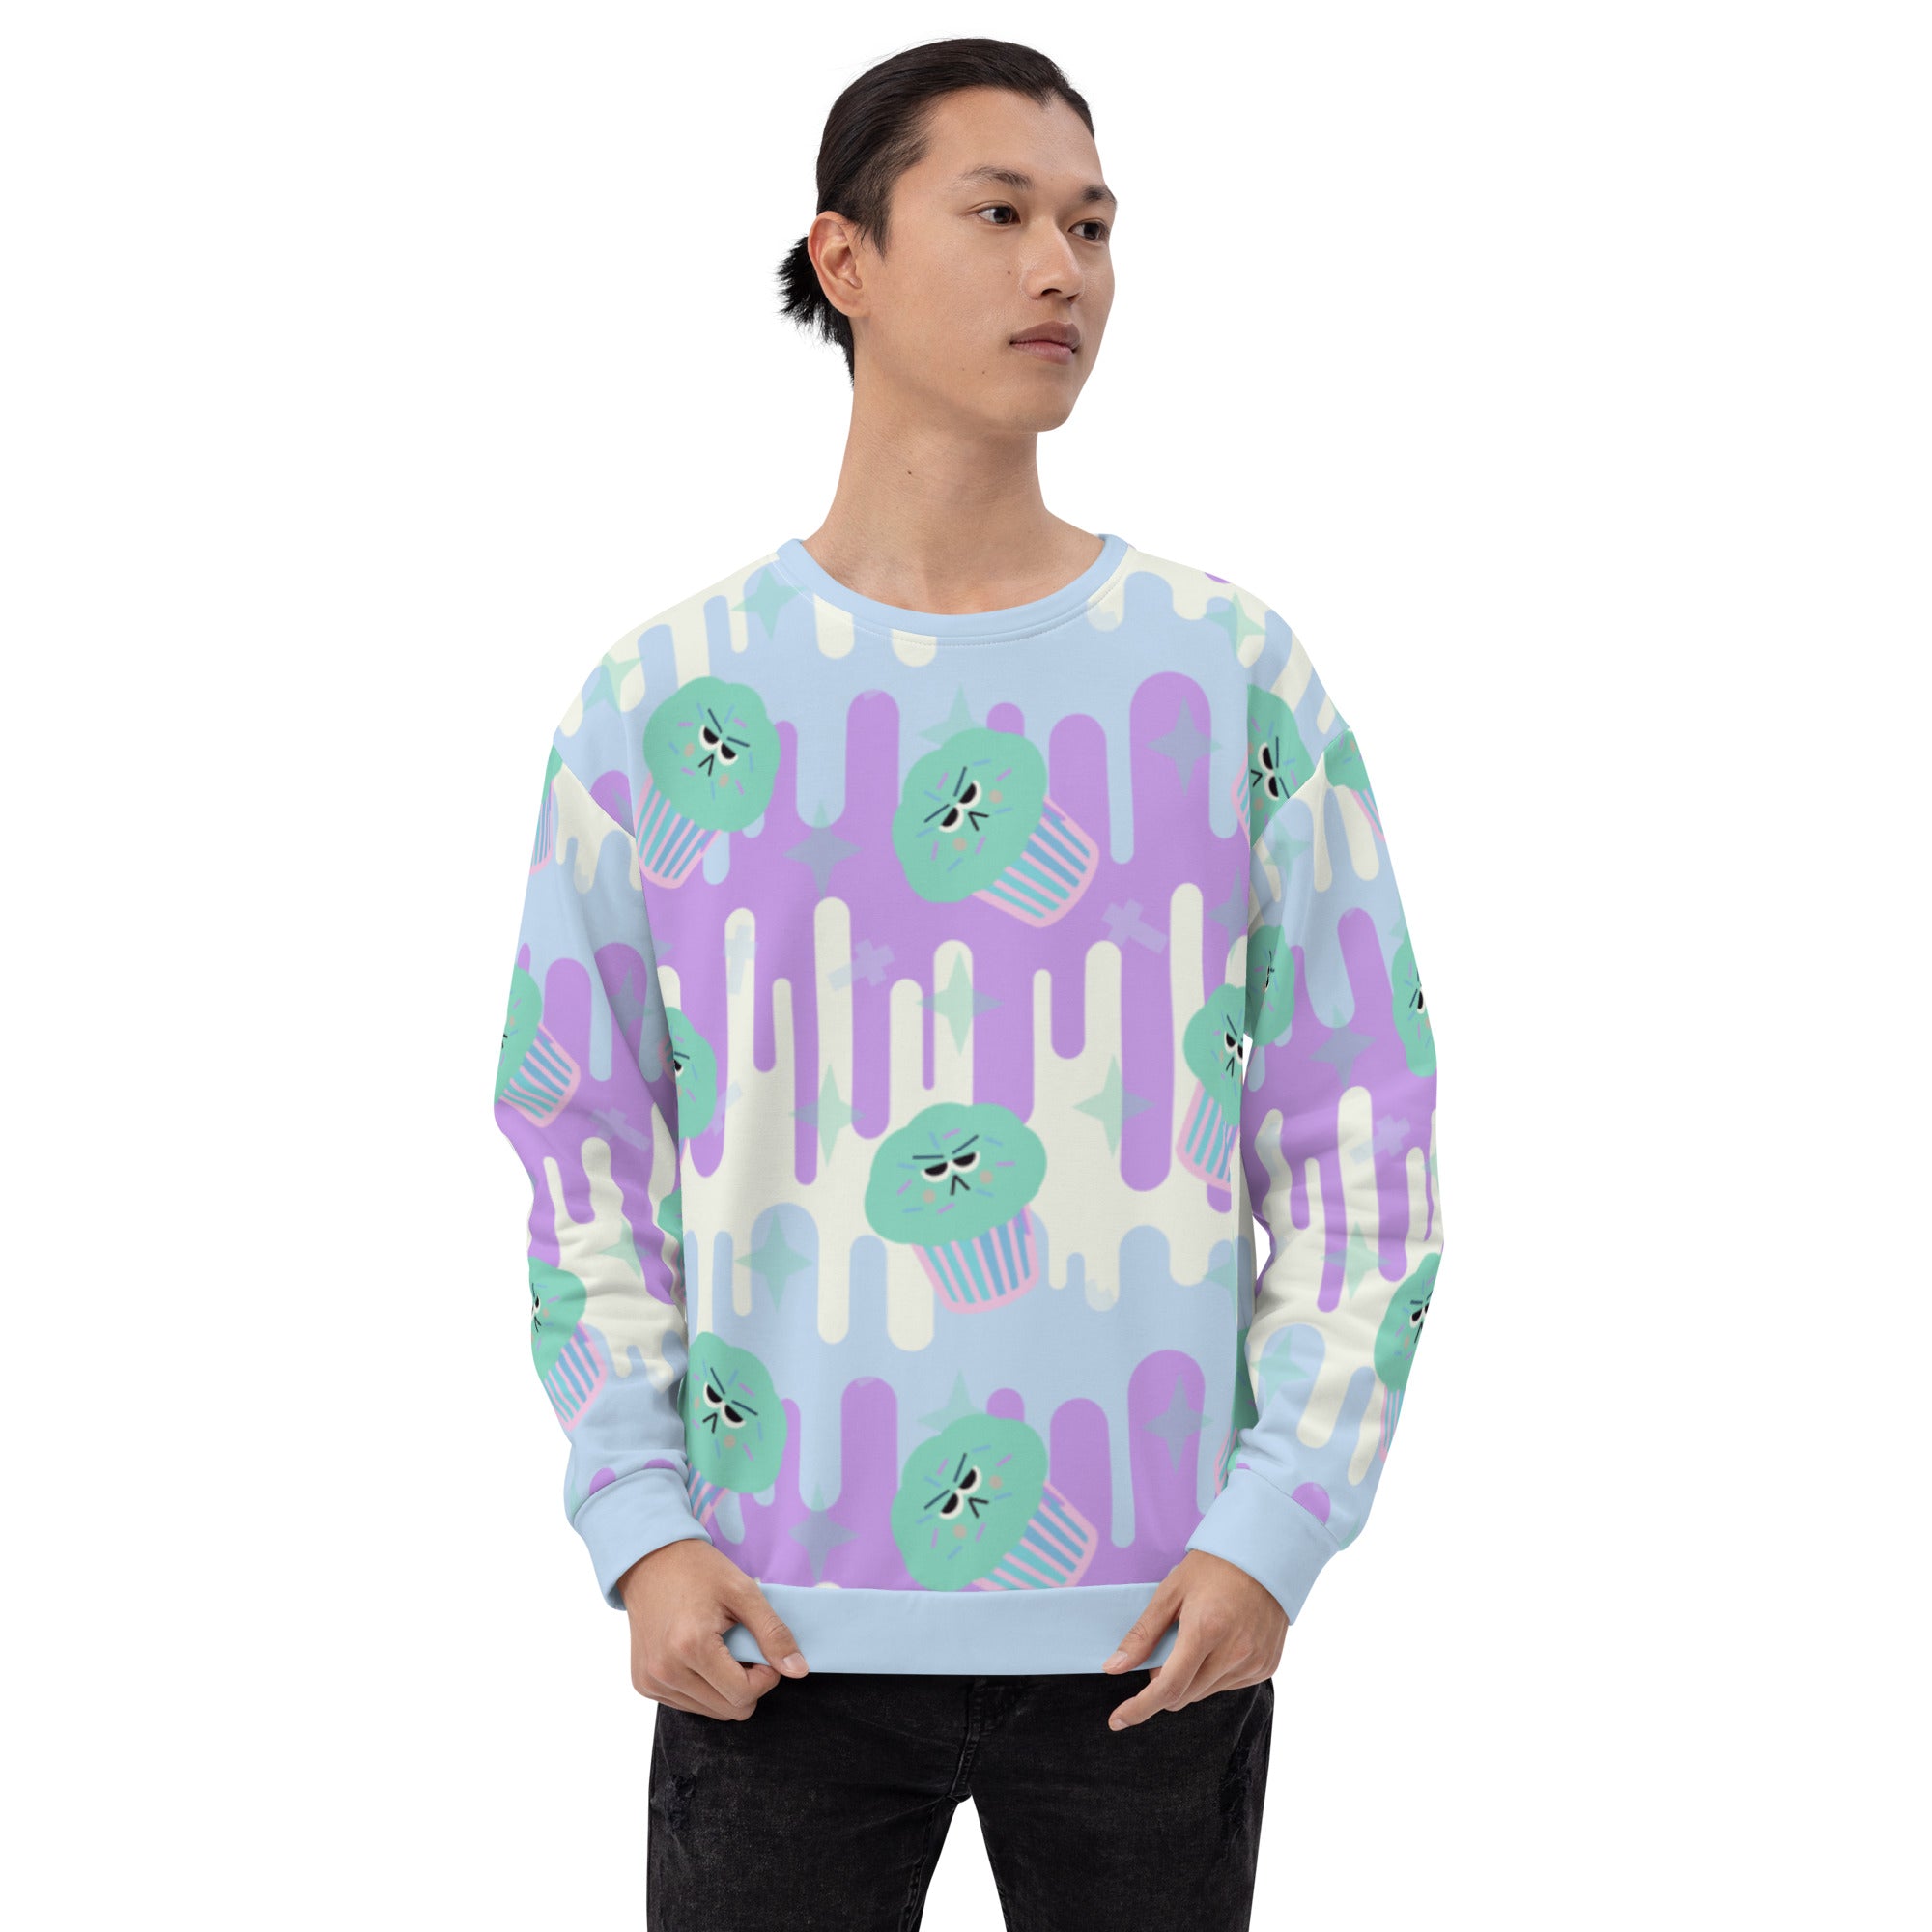 Fairy Kei sweater in Japanese Harajuku style with green frosted cupcakes against a drip background in pastel tones of blue, purple and cream and with translucent sprinkles of confetti on this unisex sweatshirt by BillingtonPix